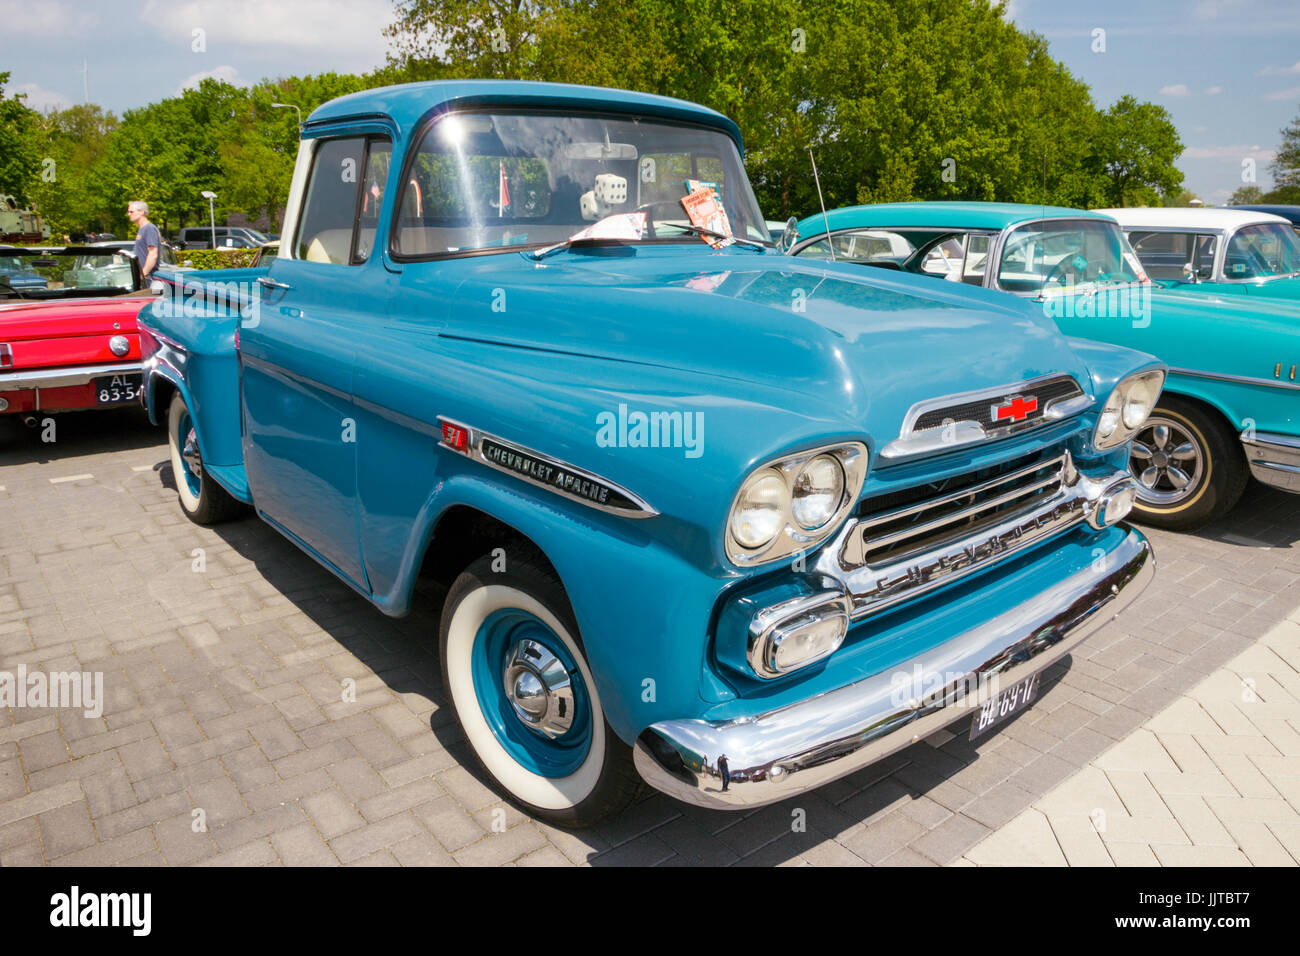 DEN BOSCH, THE NETHERLANDS - MAY 10, 2015: Blue 1959 Chevrolet Apache 3100 classic pickup truck. Stock Photo